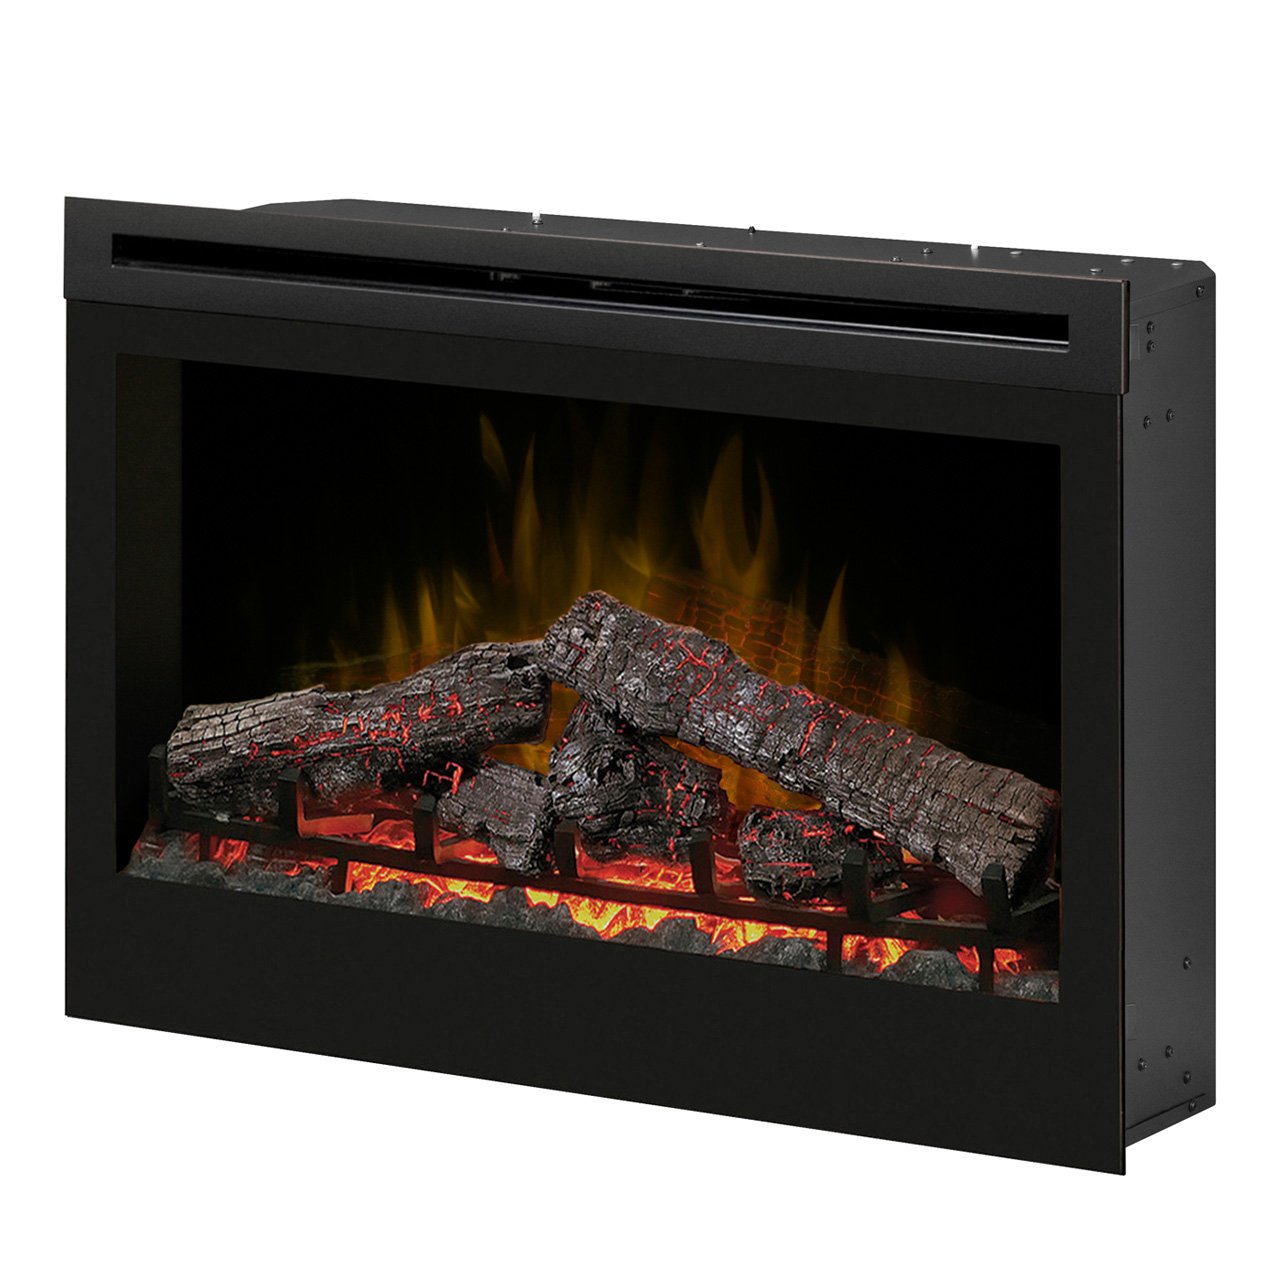 Fireplace Items Luxury Dimplex Df3033st 33 Inch Self Trimming Electric Fireplace Insert